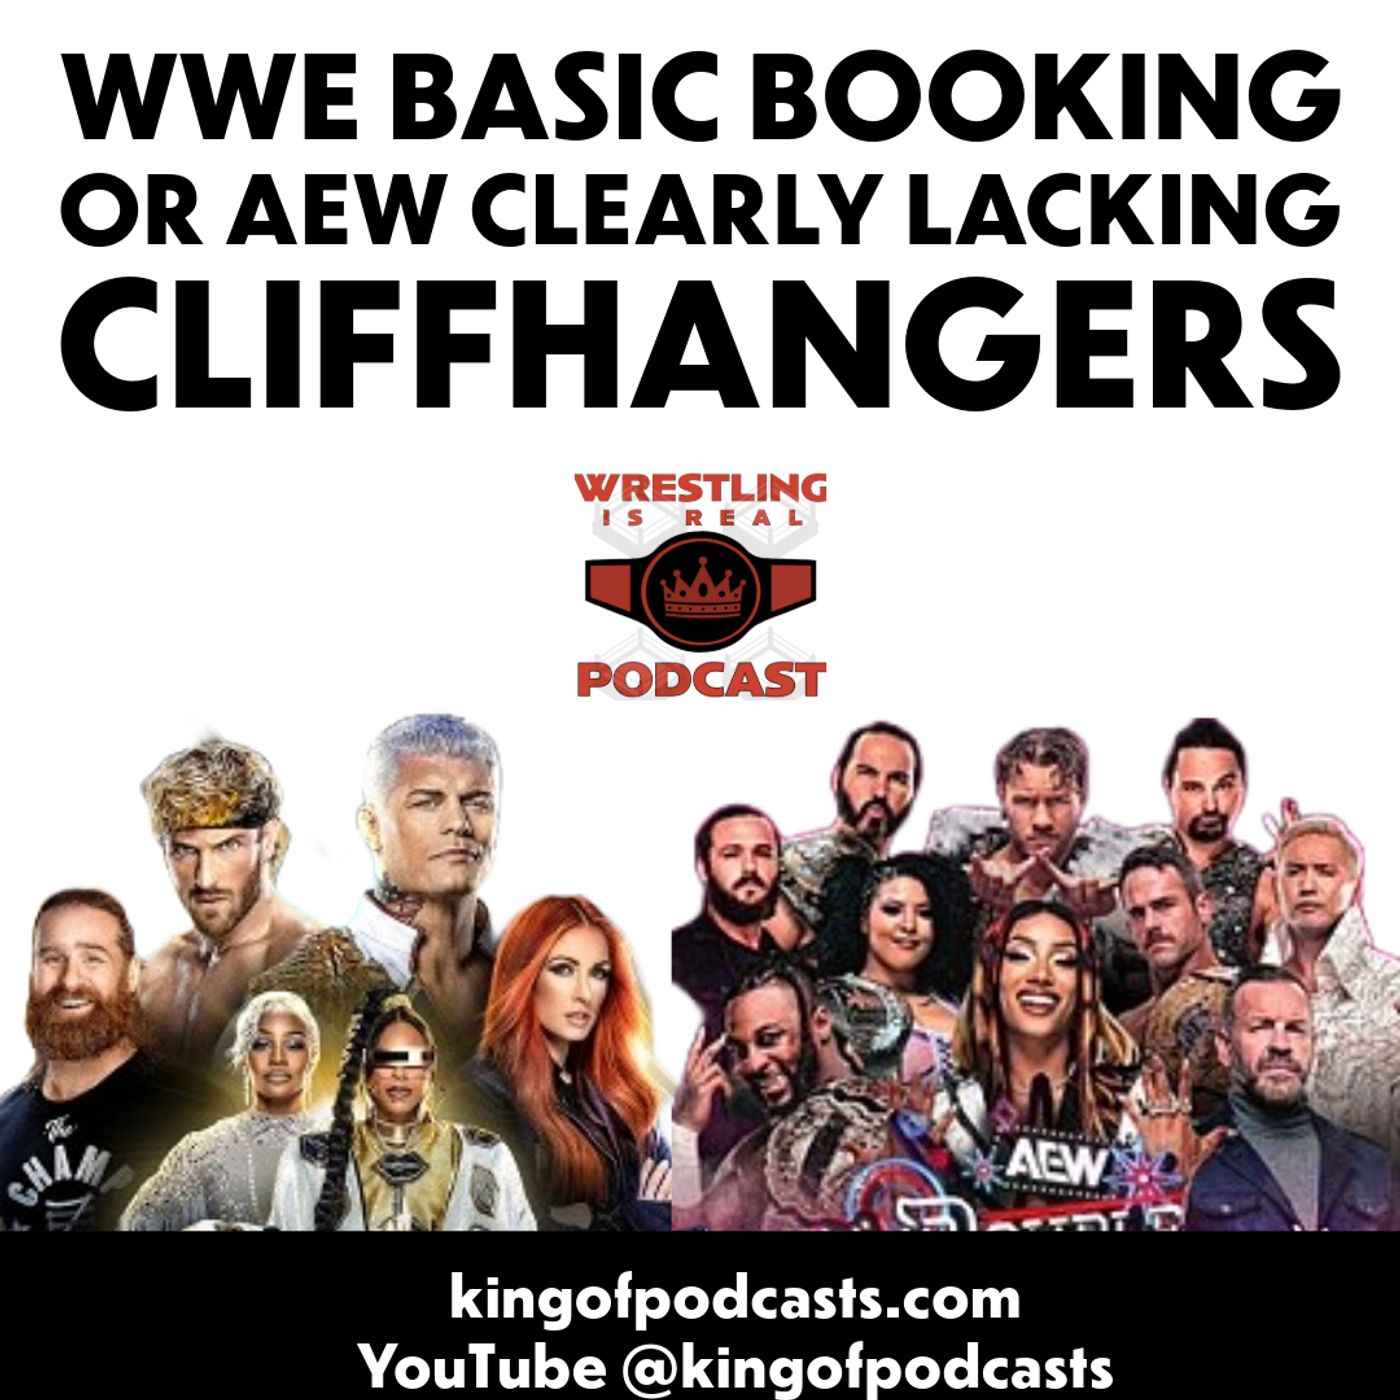 WWE Basic Booking vs AEW Clearly Lacking Cliffhangers (ep.849)